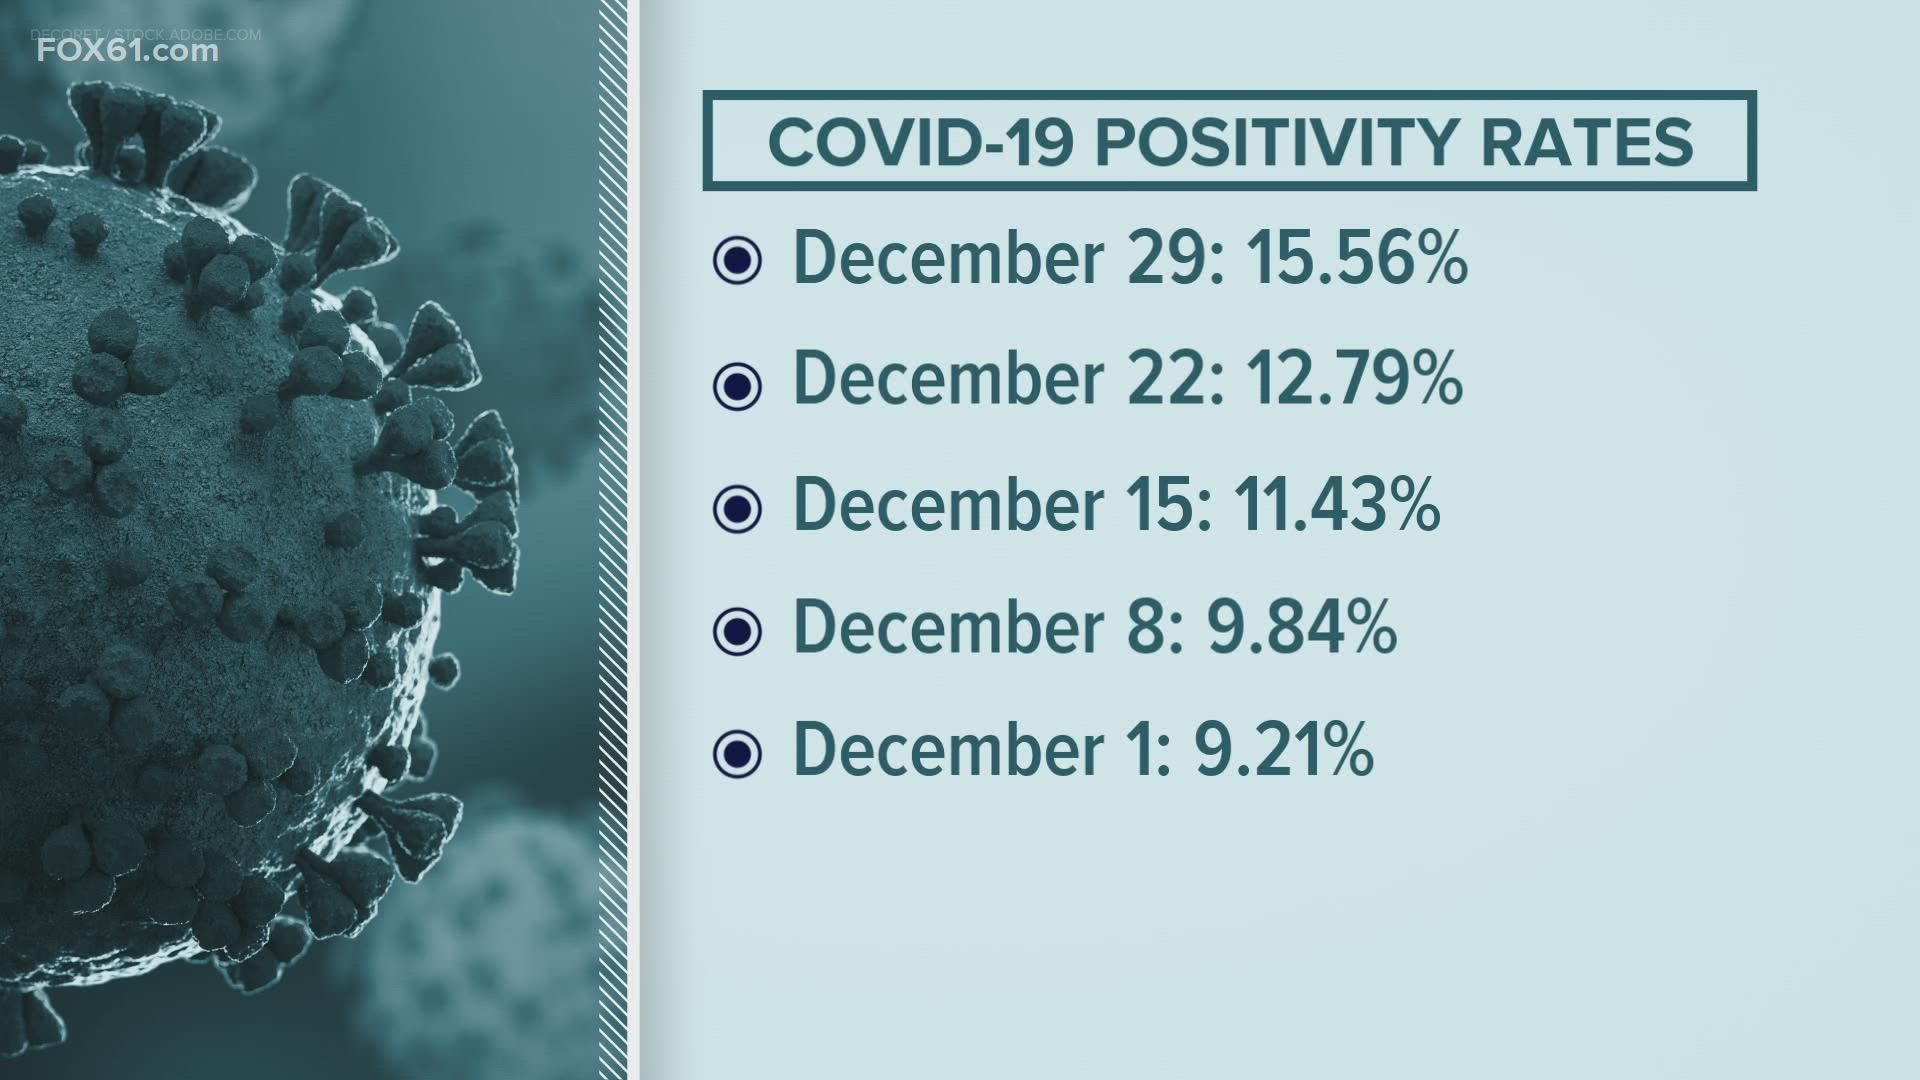 As of December 29, the Connecticut positivity rate is at 15.56%.